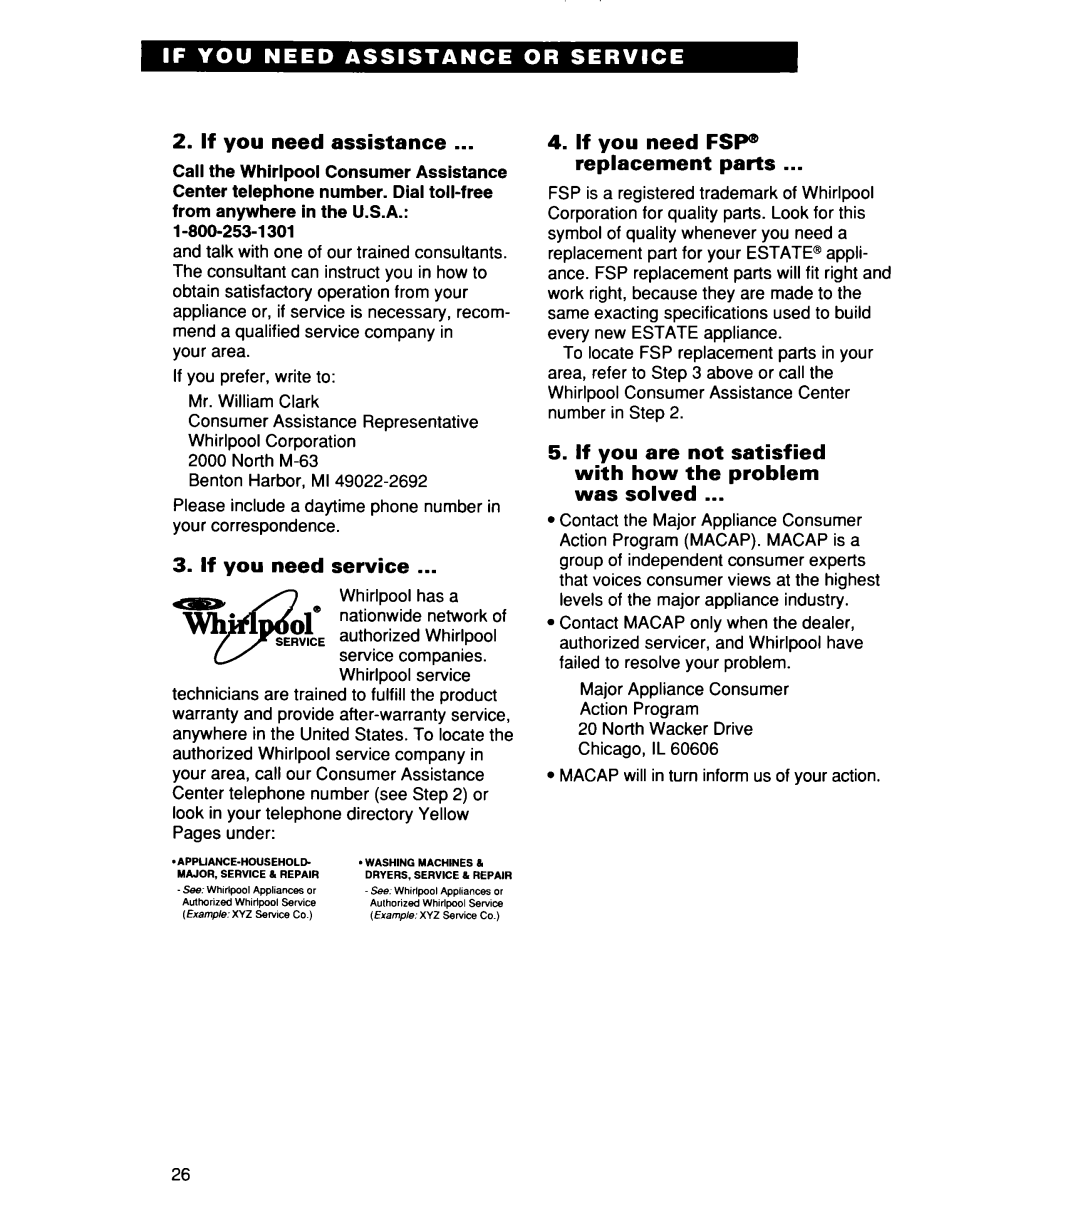 Whirlpool TER20WOD manual If you need assistance, If you need service, If you need FSP Replacement parts, 800-253-l 